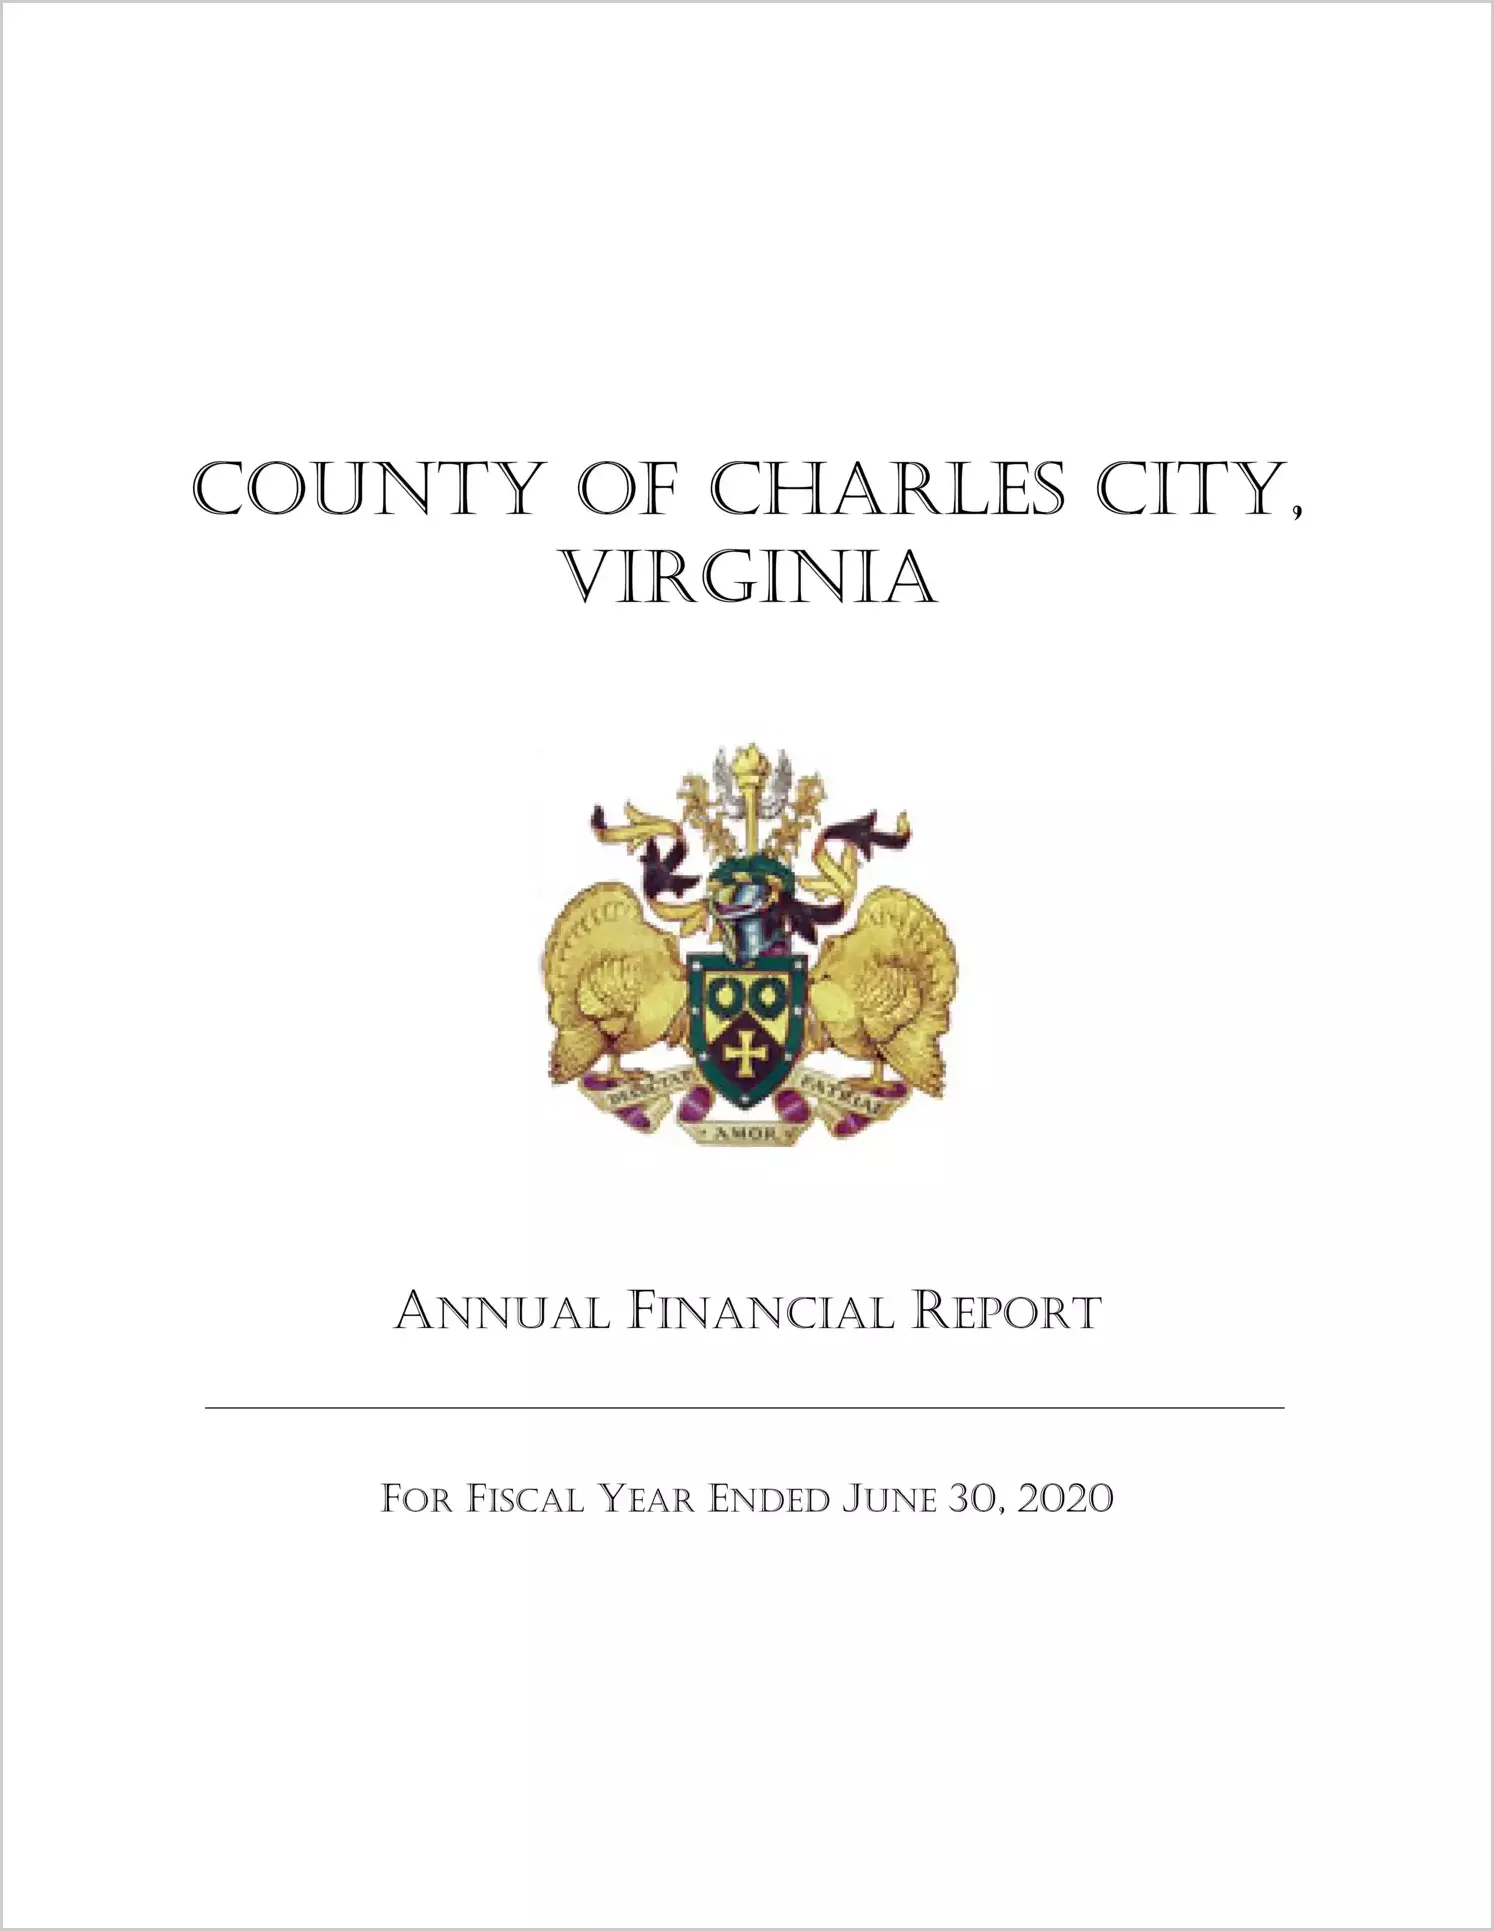 2020 Annual Financial Report for County of Charles City